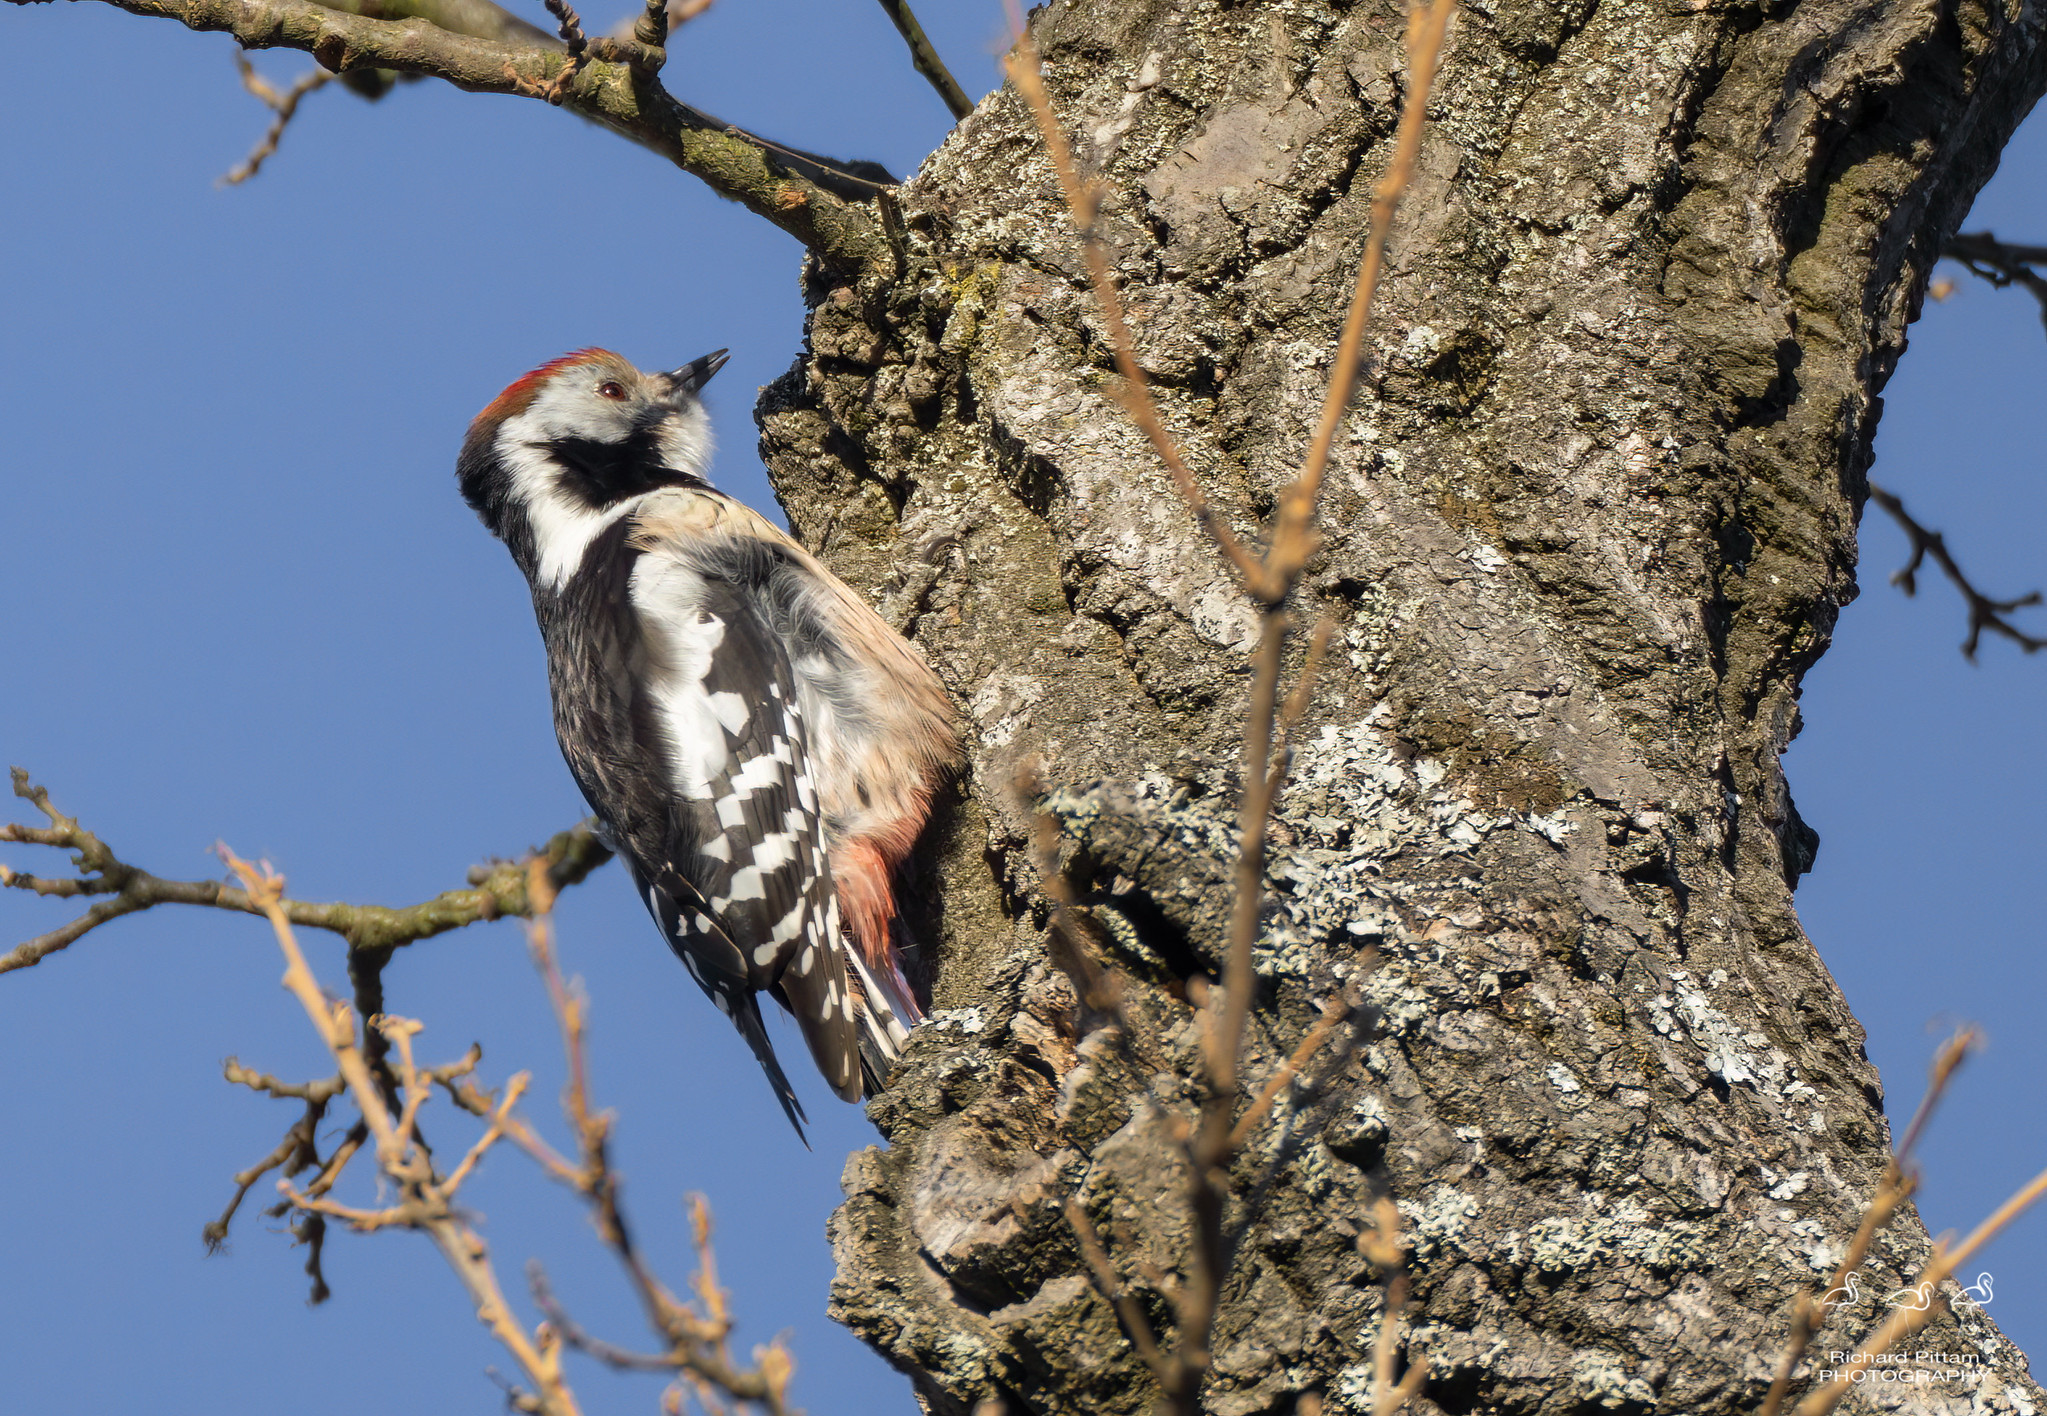 Middle-spotted Woodpecker